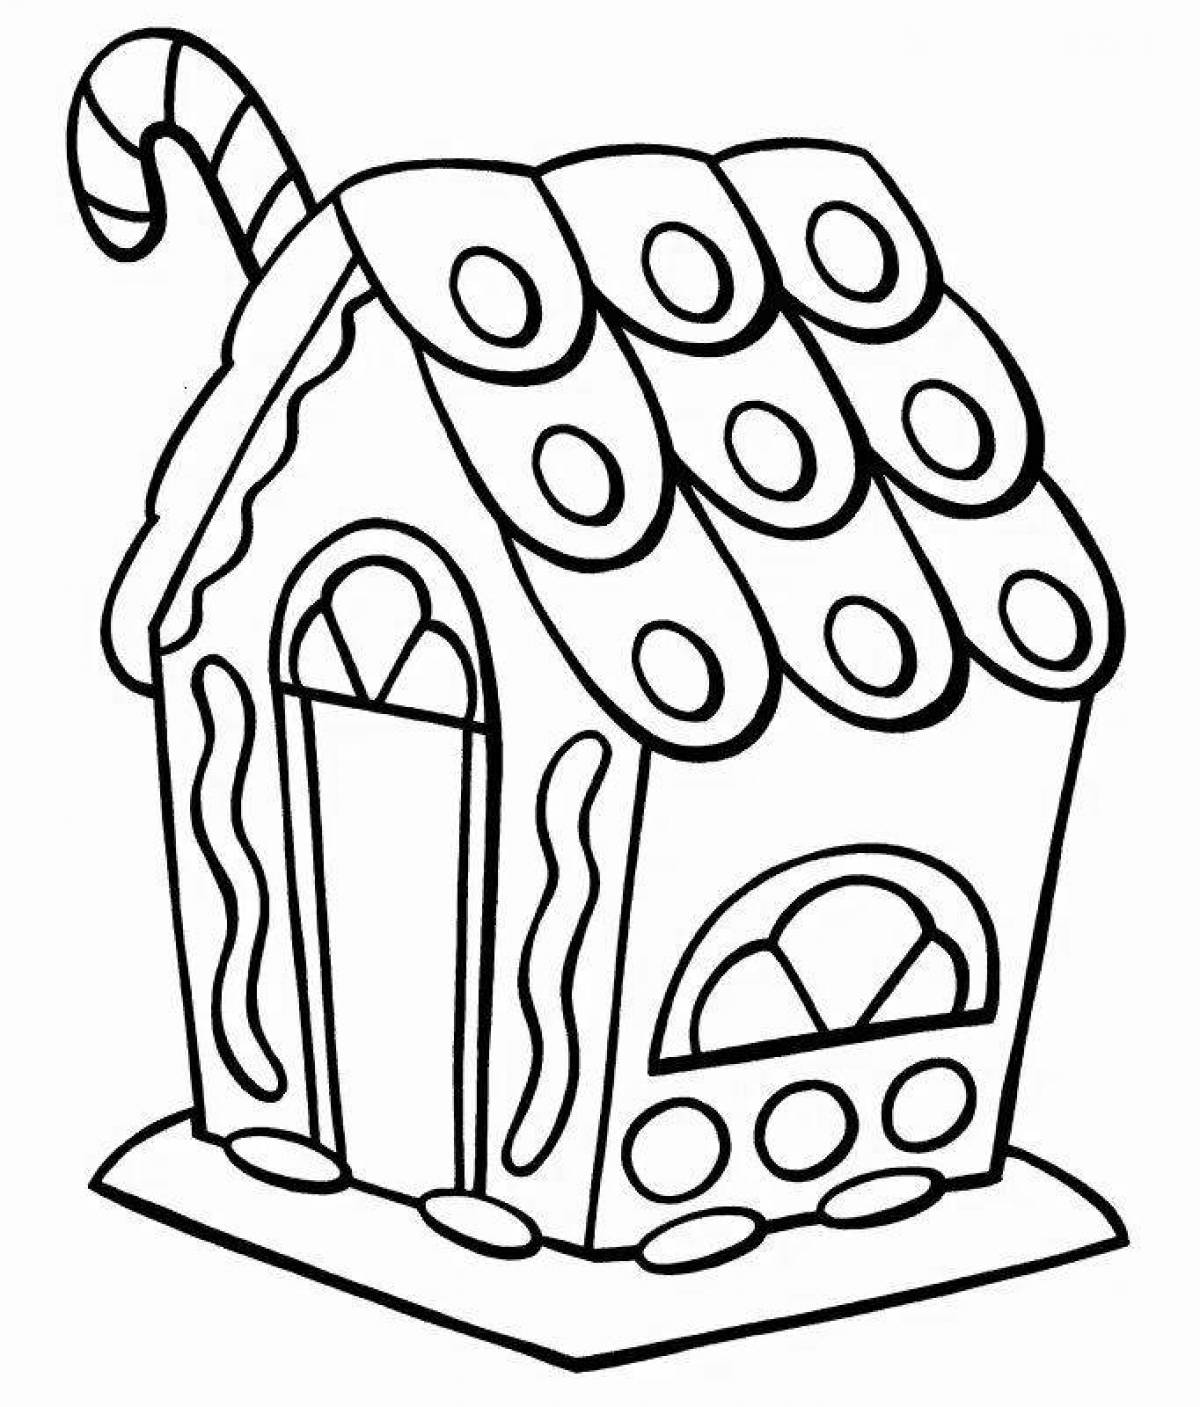 A fun gingerbread house coloring book for kids